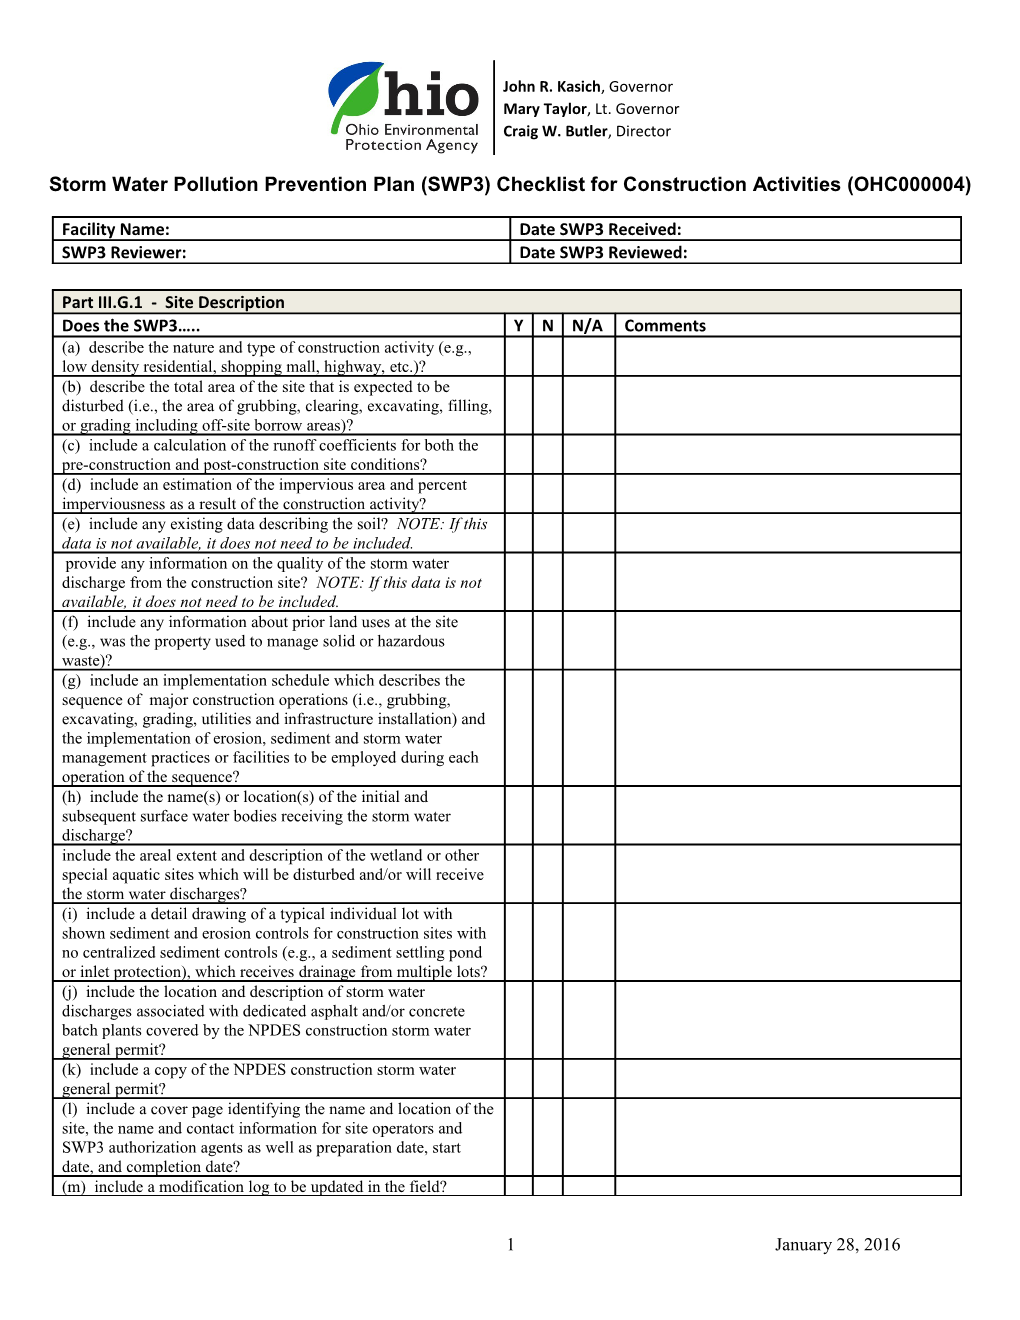 Storm Water Pollution Prevention Plan (SWP3) Checklist for Construction Activities (OHC000004)